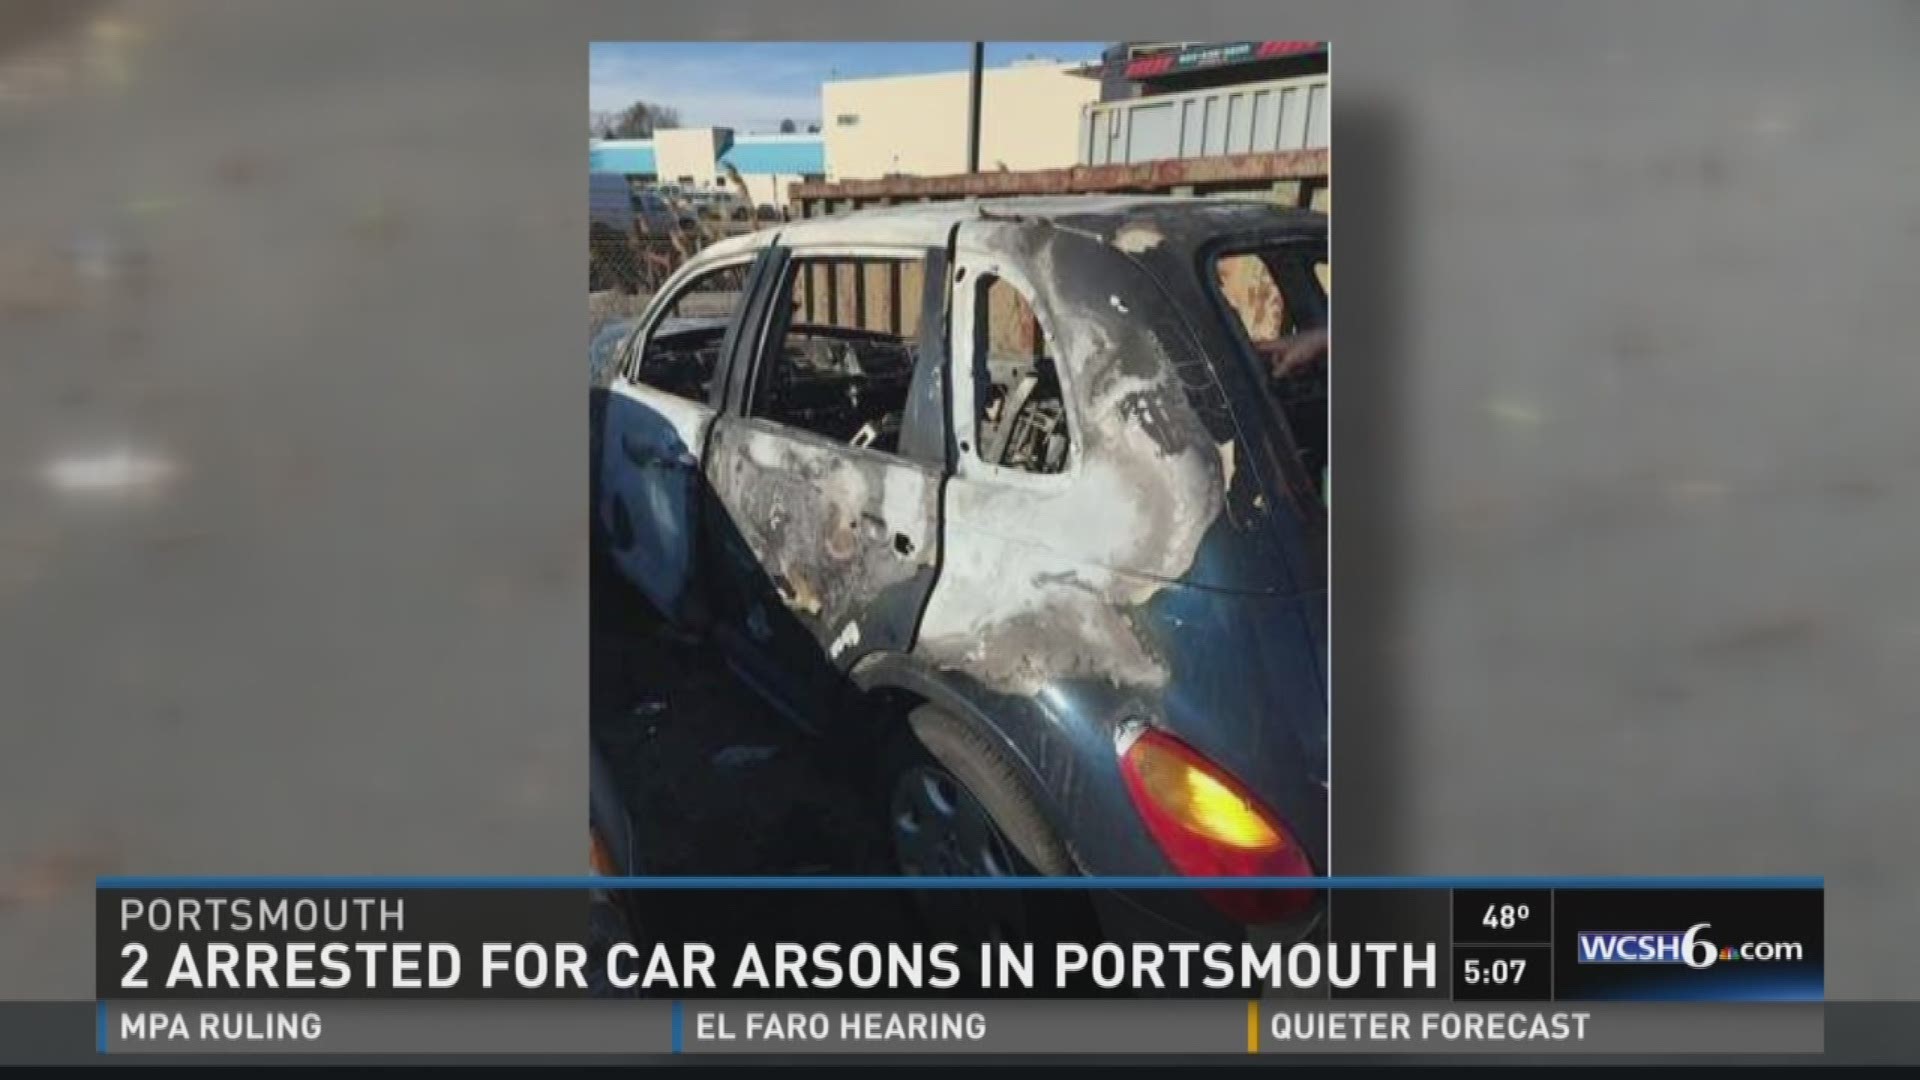 Portsmouth arson charges